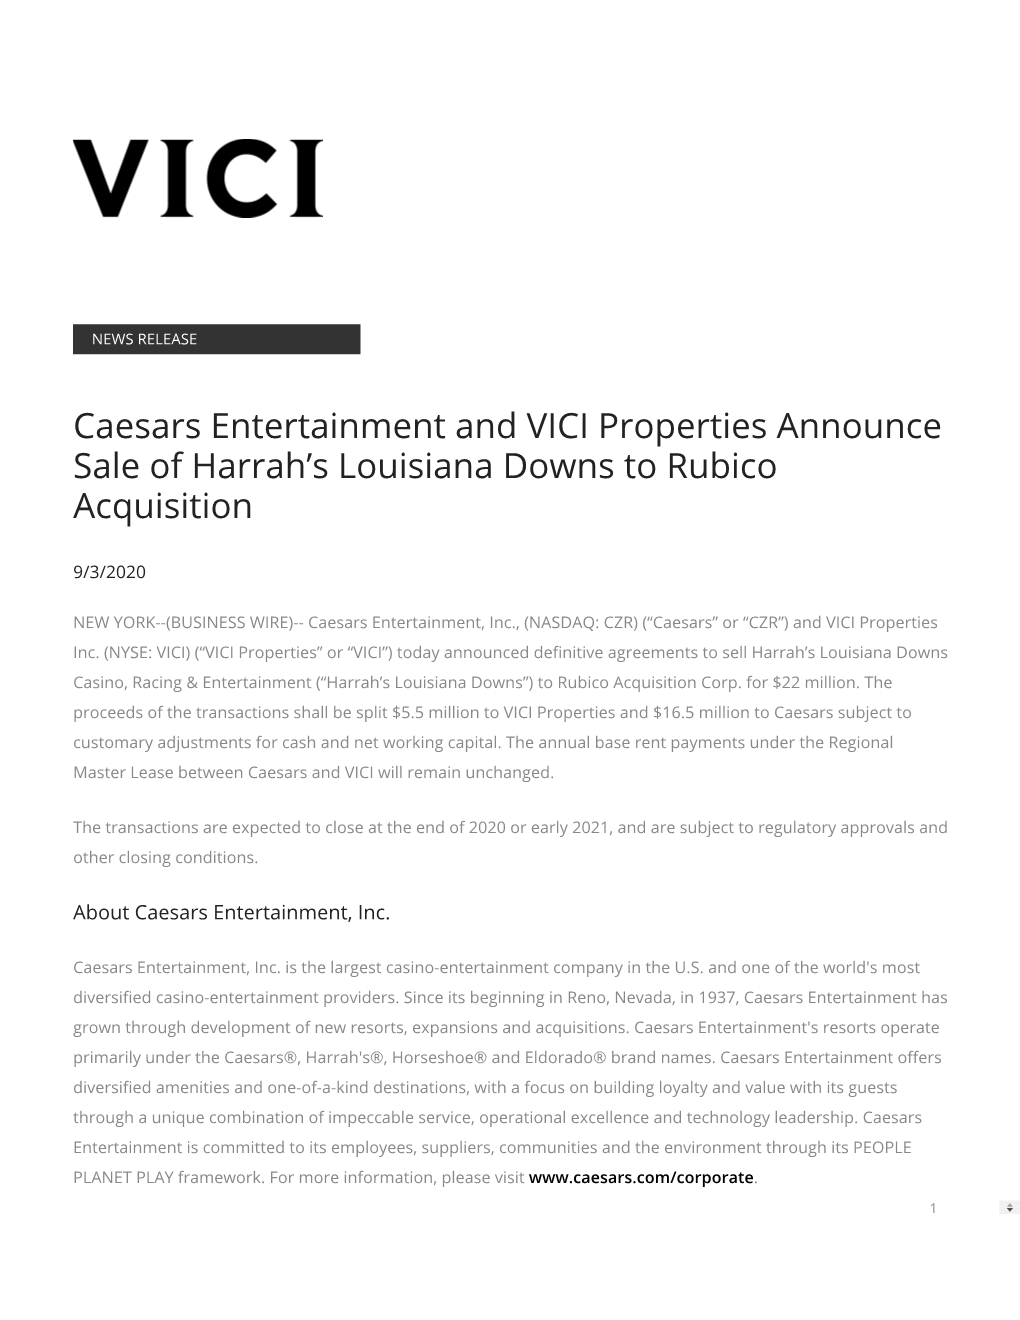 Caesars Entertainment and VICI Properties Announce Sale of Harrah’S Louisiana Downs to Rubico Acquisition